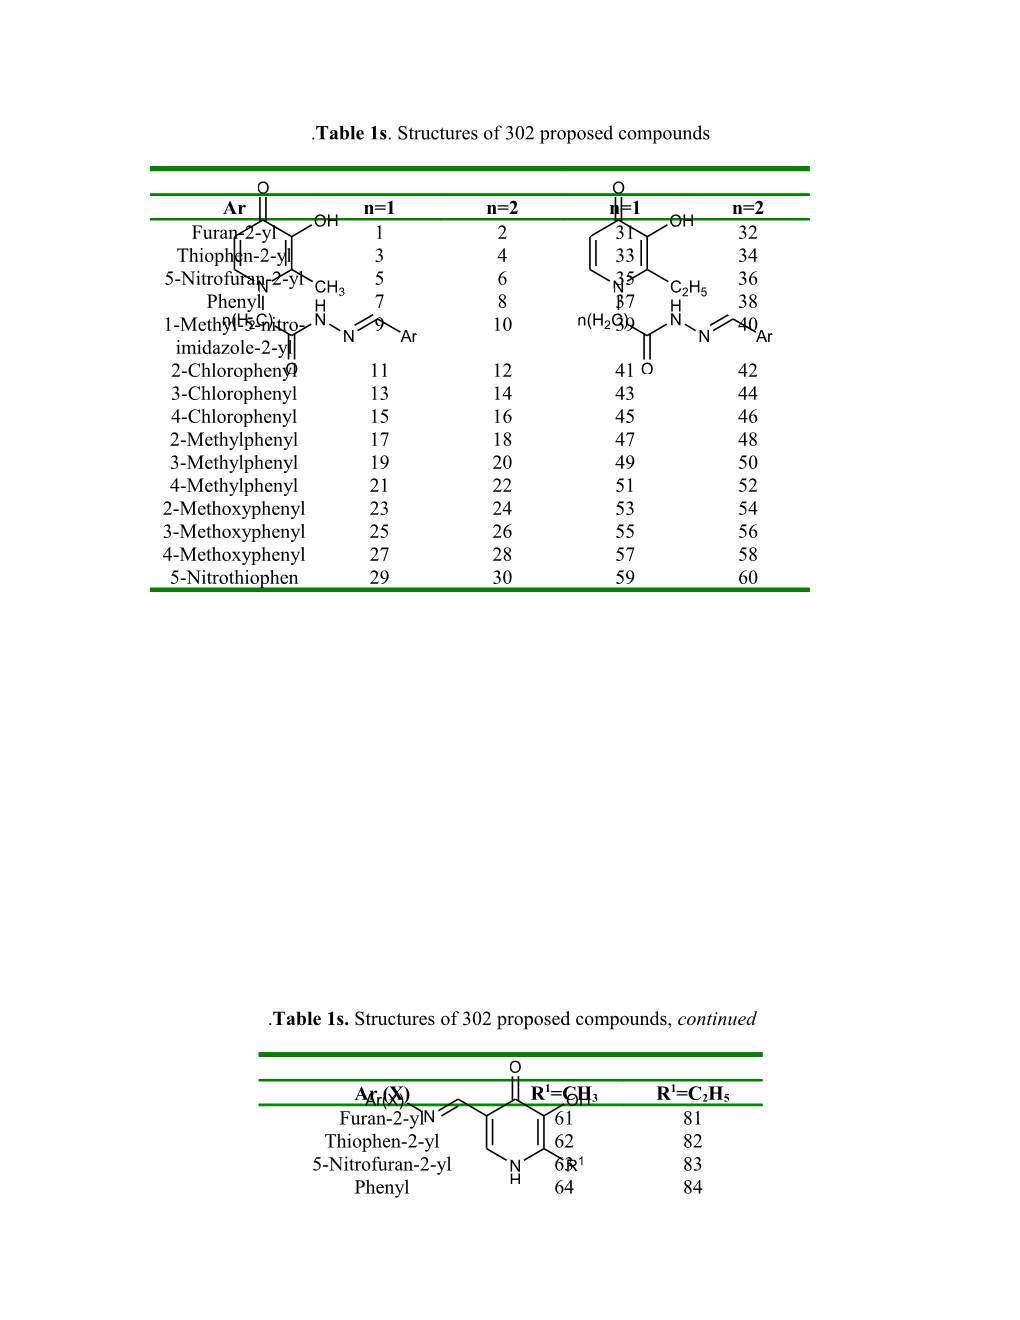 Table 1S. Structures of 302 Proposed Compounds